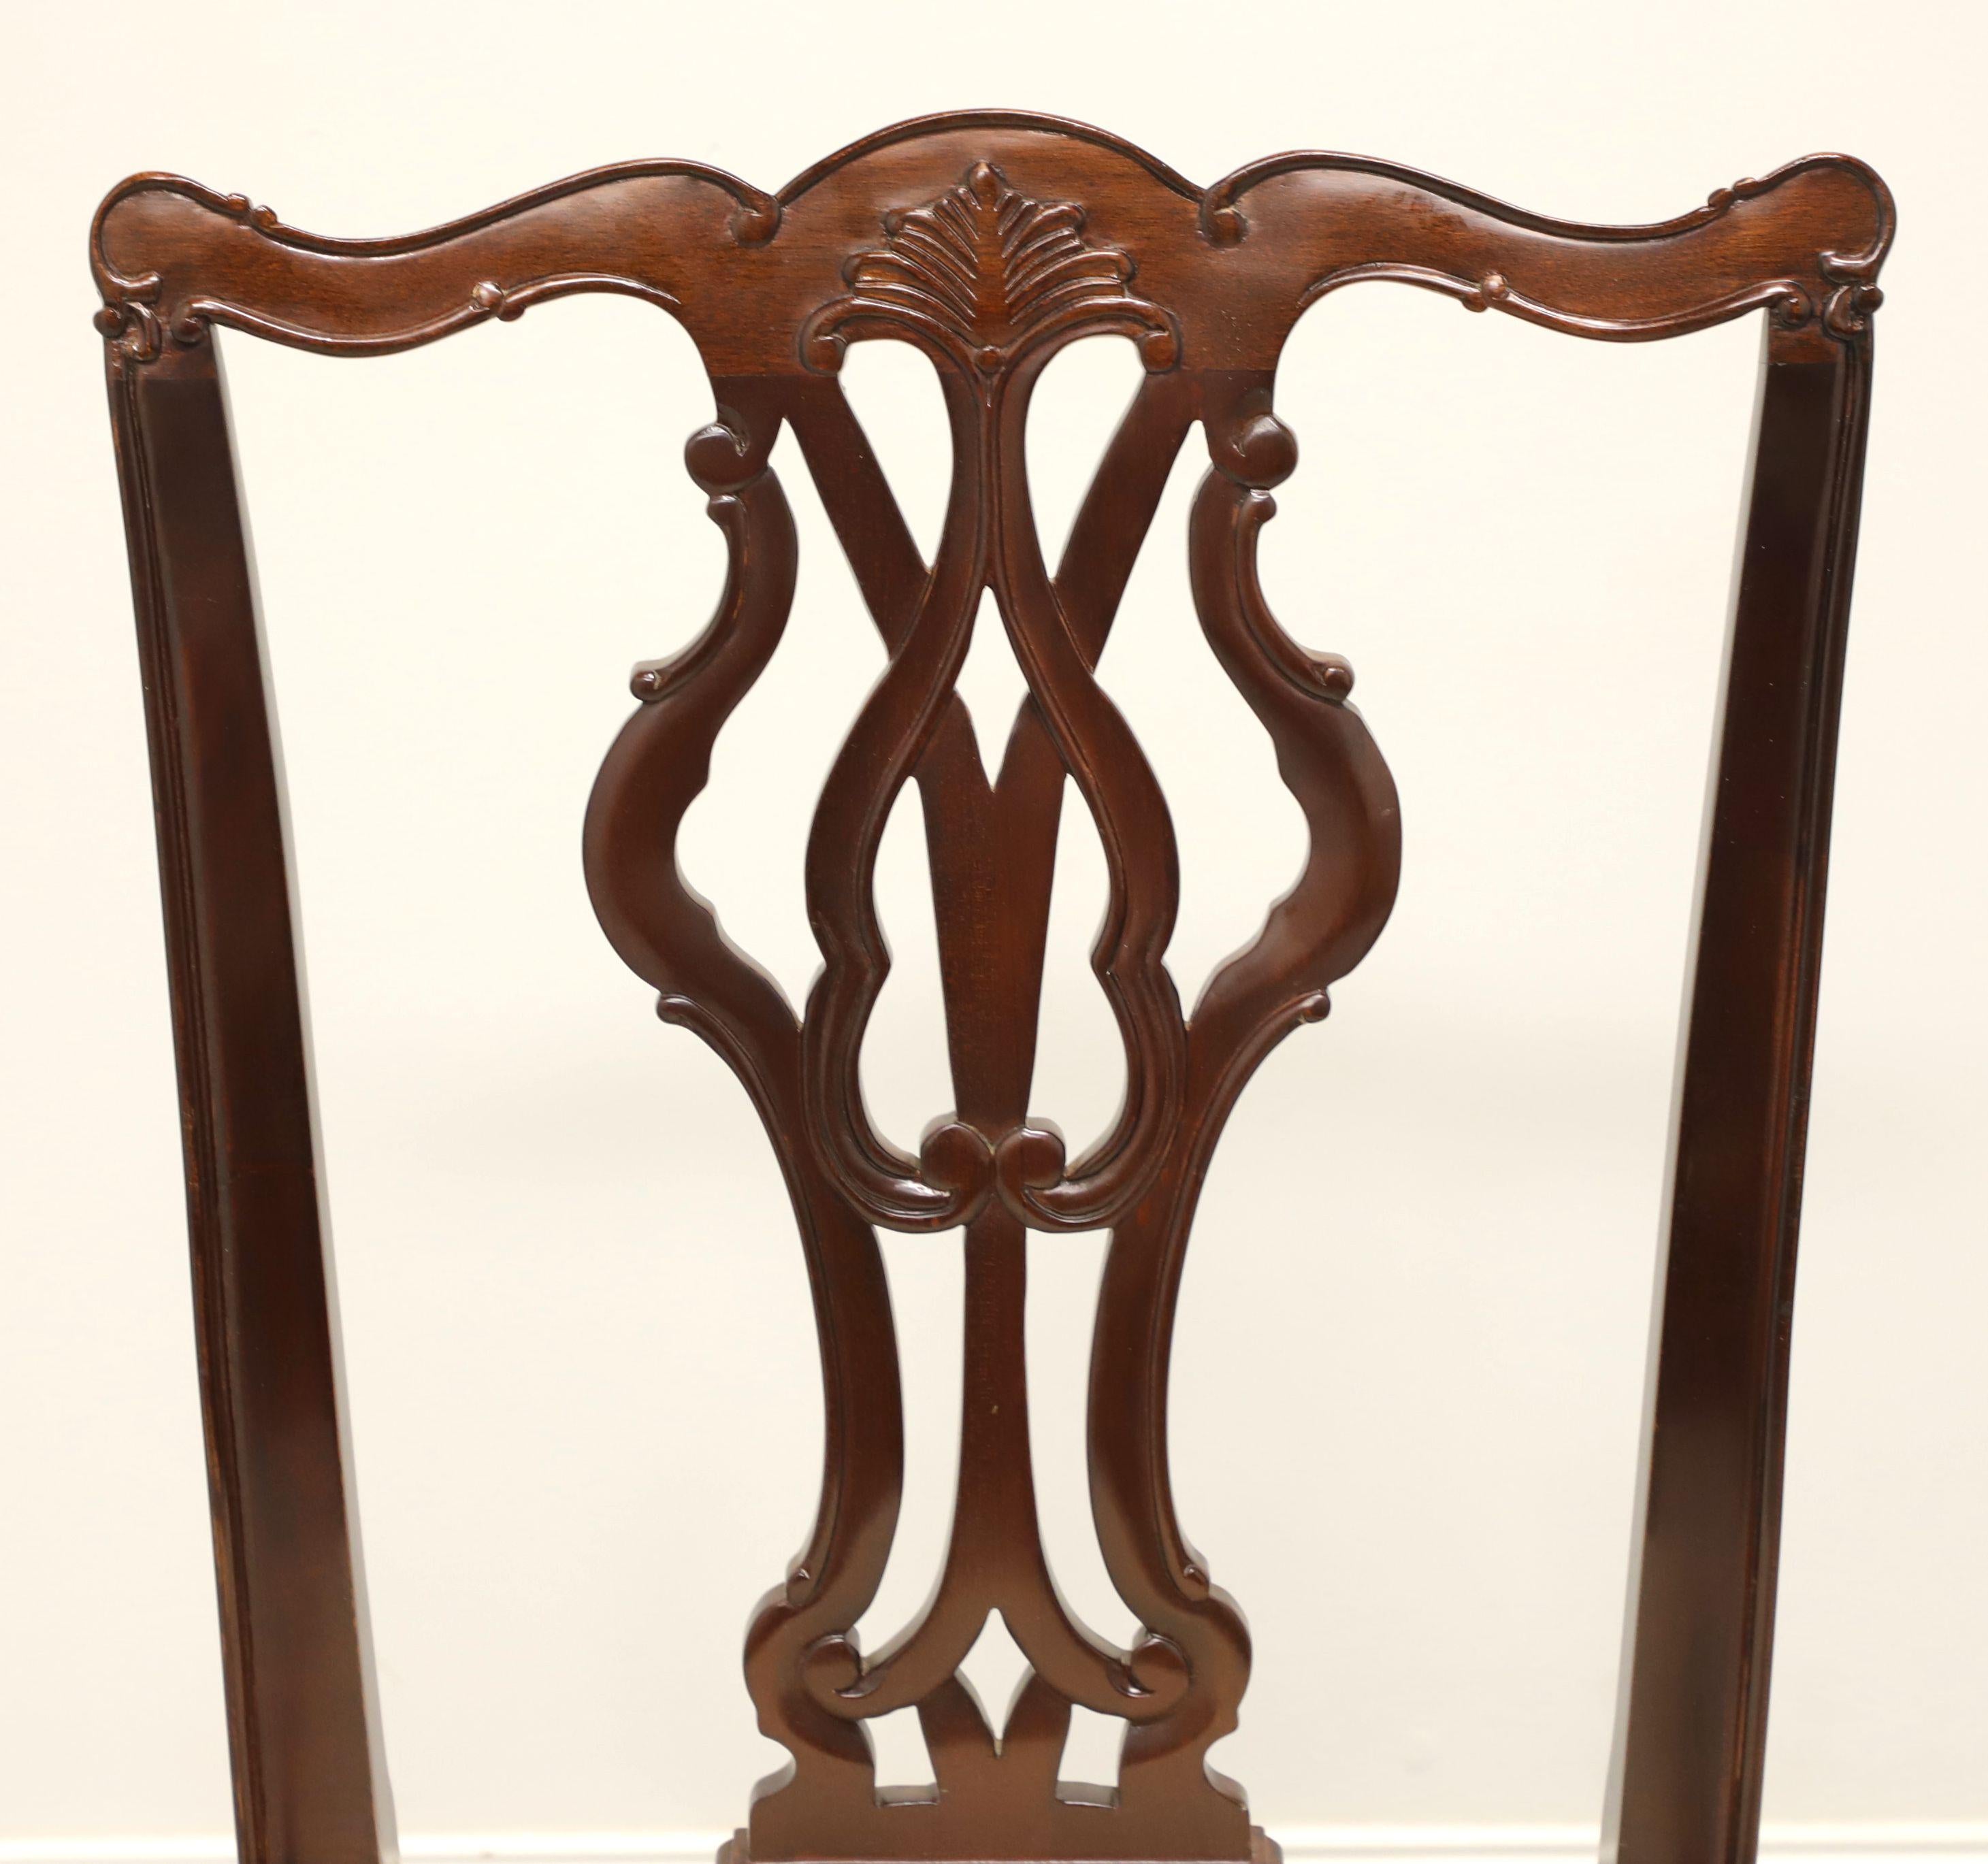 WELLINGTON HALL Mahogany Chippendale Straight Leg Dining Side Chairs - Pair A In Good Condition For Sale In Charlotte, NC